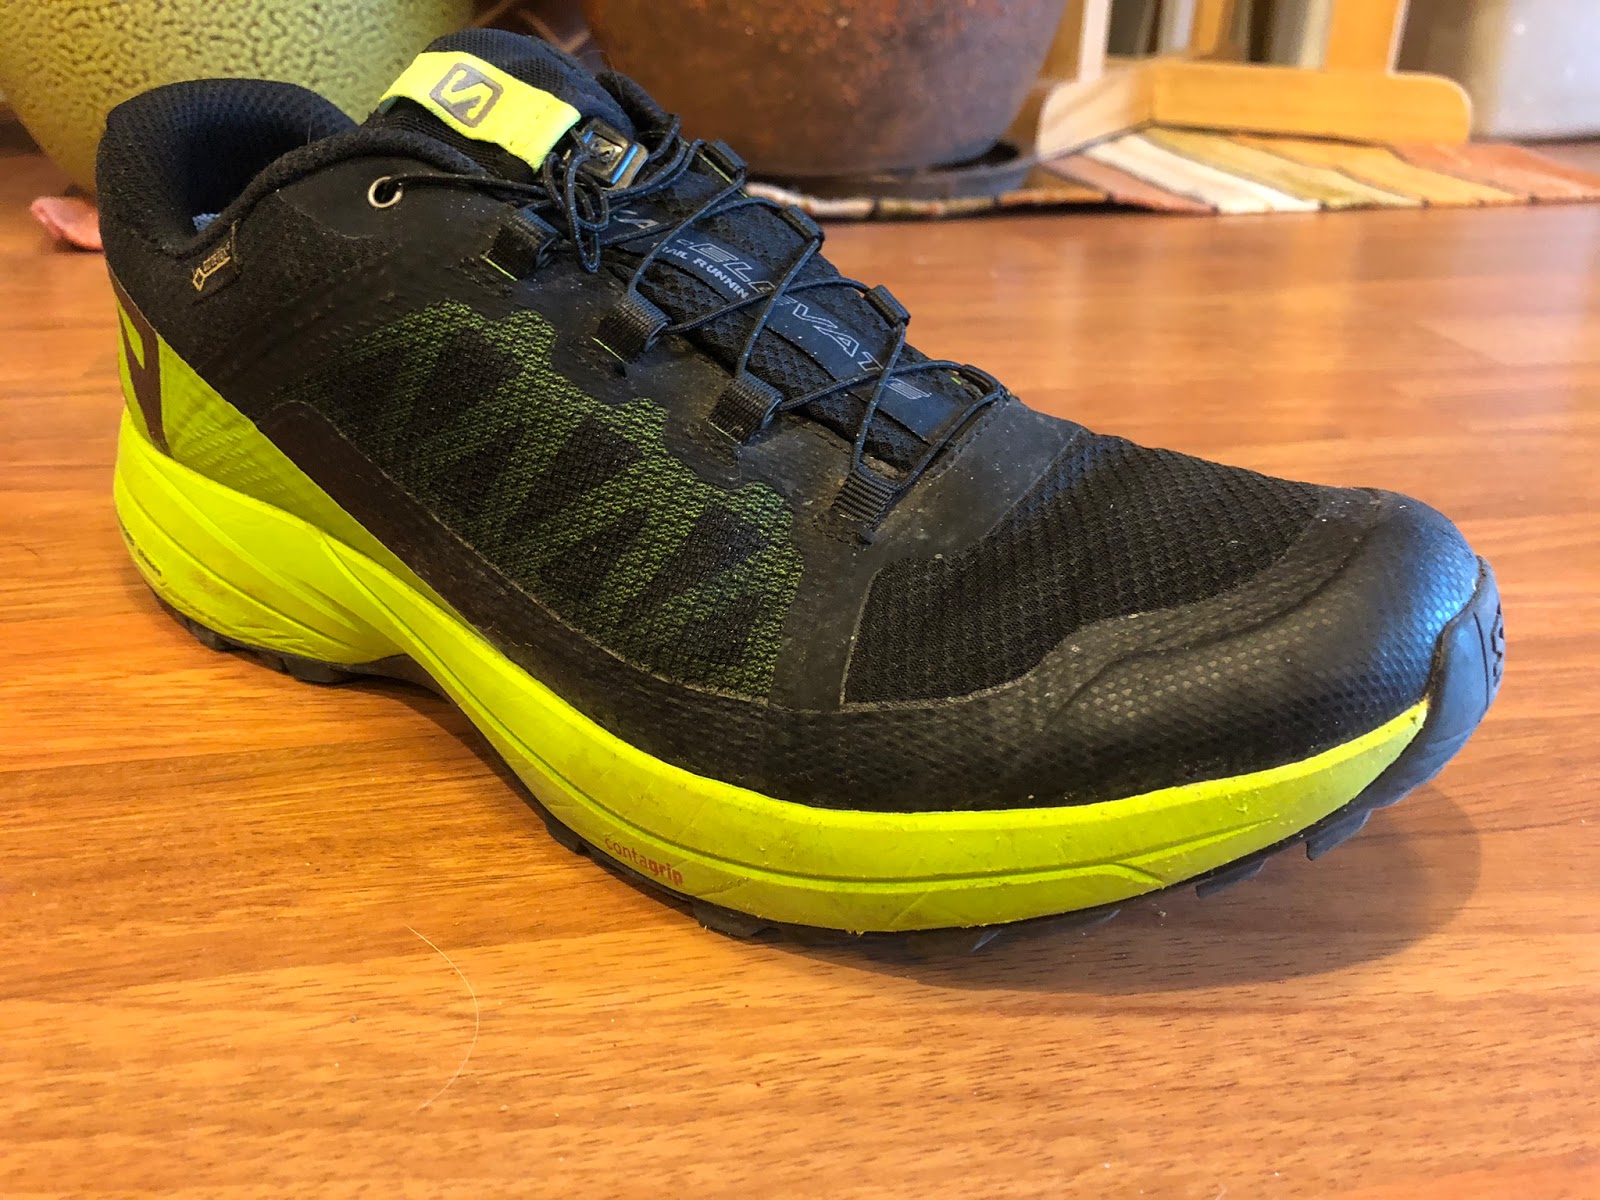 comercio lucha Chicle Road Trail Run: Salomon XA Elevate GTX Review - All of the Rugged,  Versatile Greatness of the XA Elevate with Added Waterproof Protection